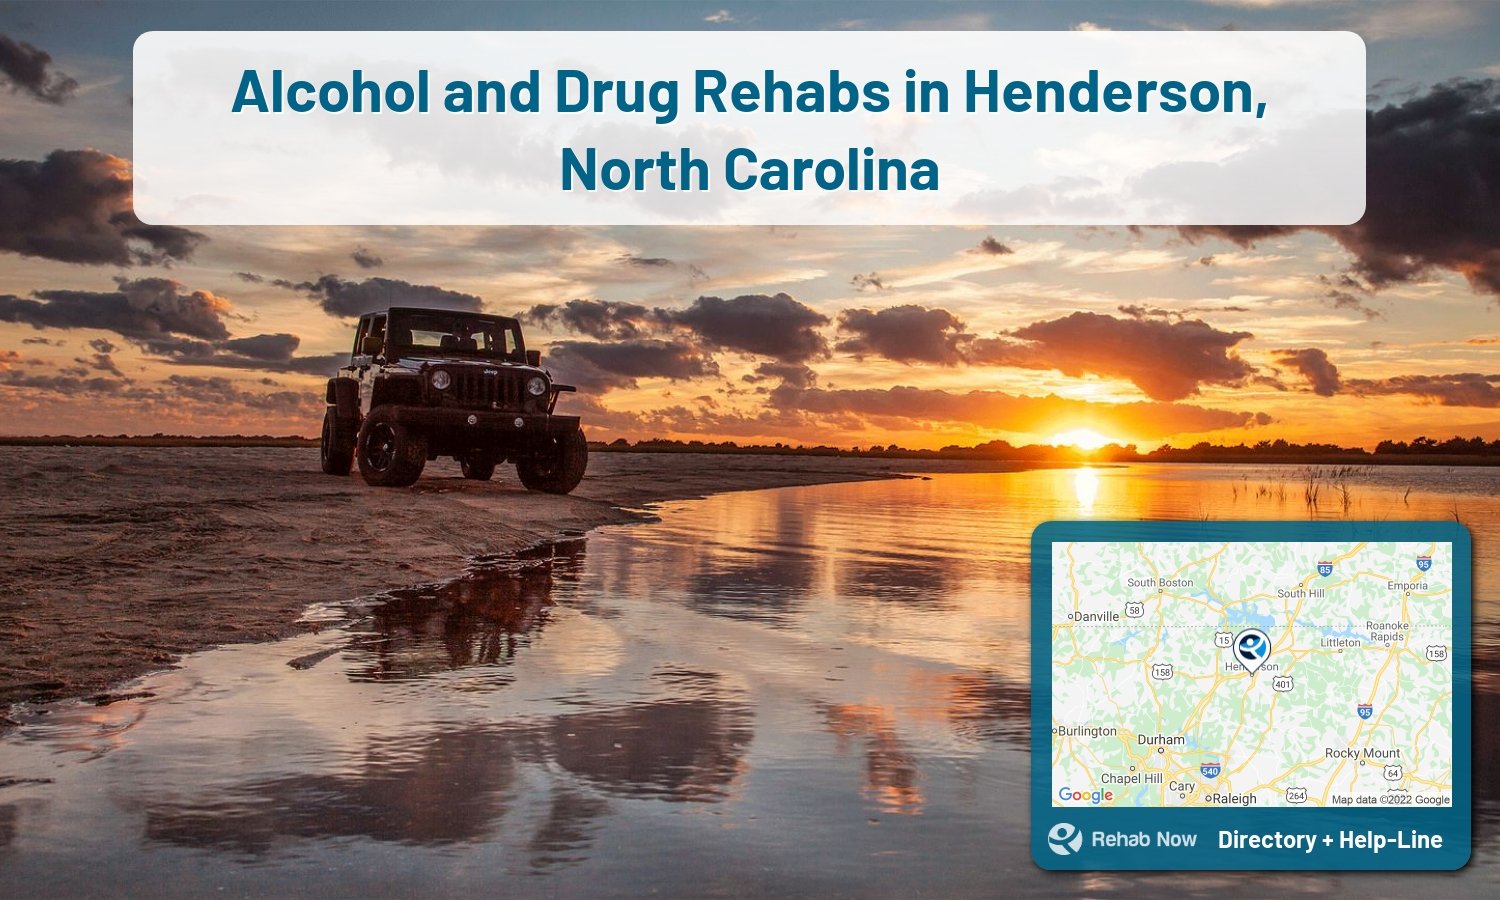 Our experts can help you find treatment now in Henderson, North Carolina. We list drug rehab and alcohol centers in North Carolina.